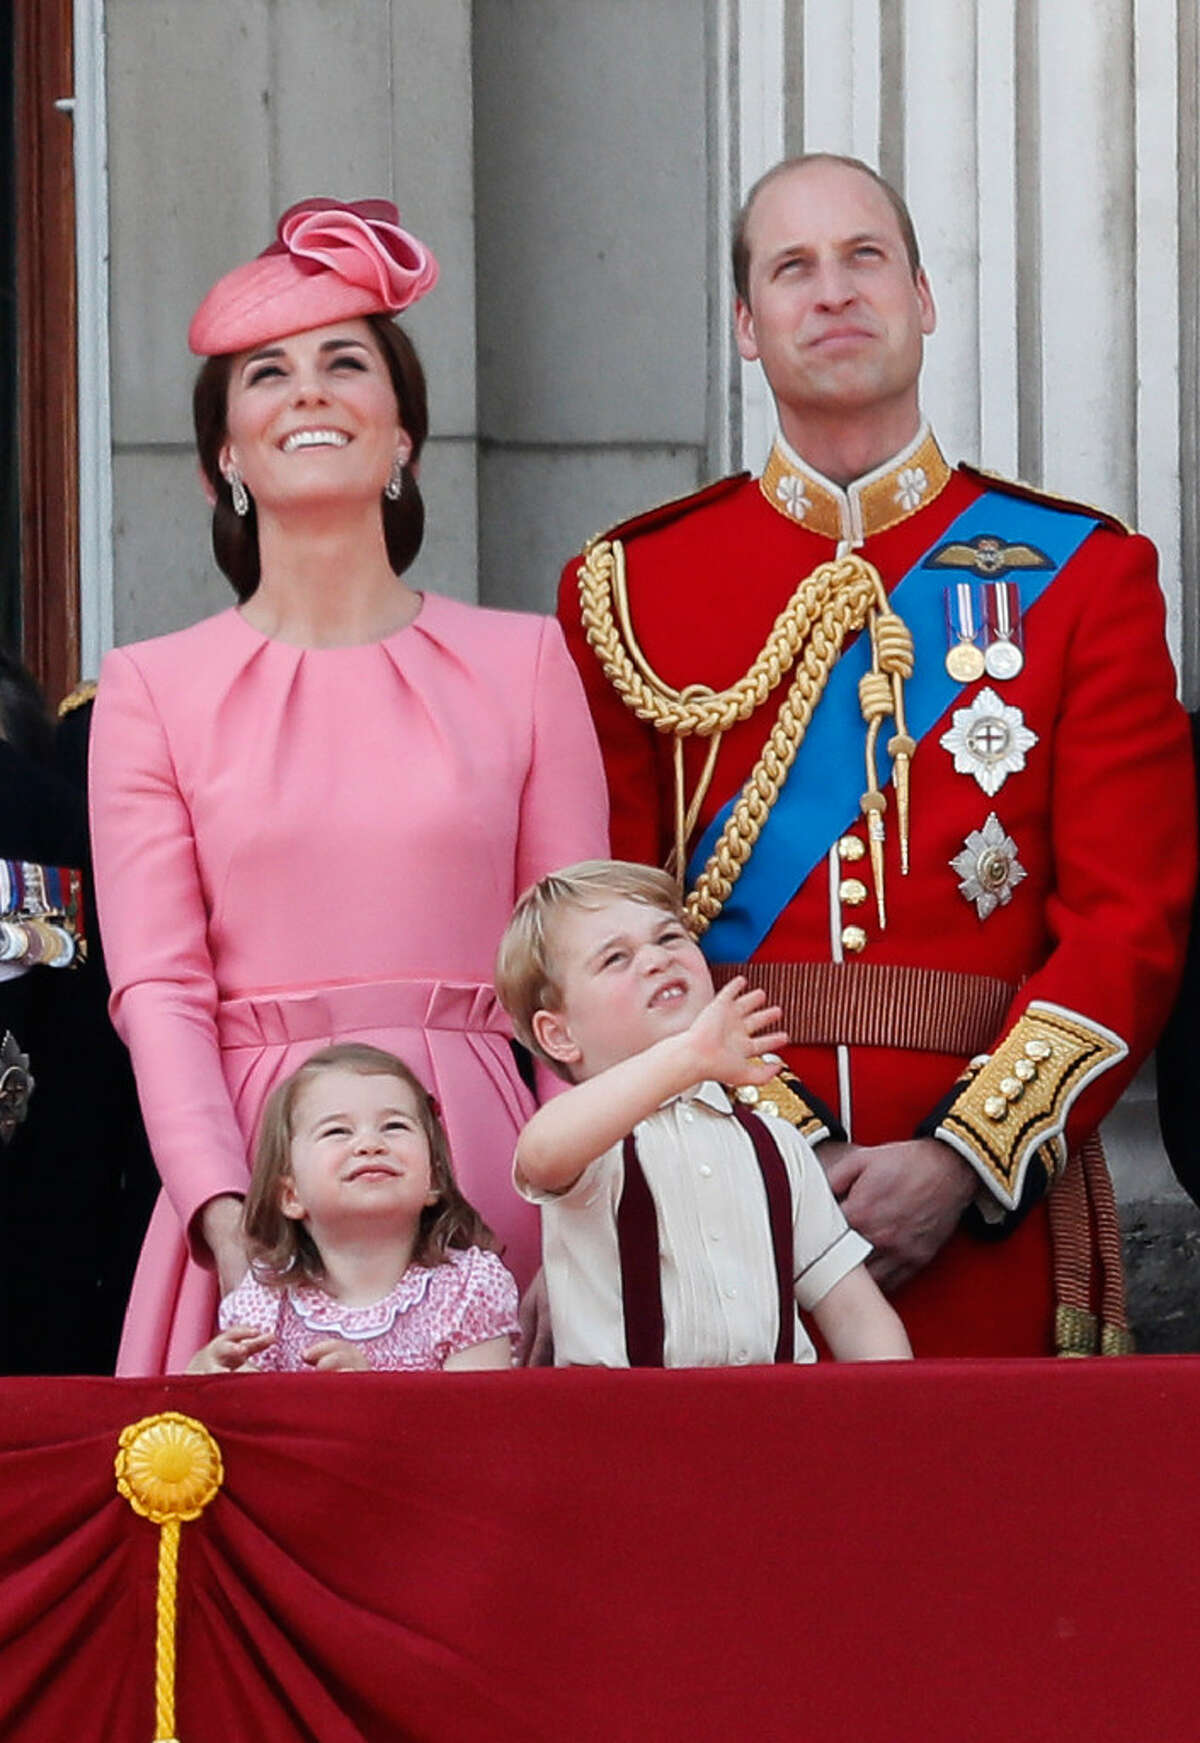 FILE - In this Saturday, June 17, 2017 file photo Britain's Kate, The Duchess of Cambridge, Prince William and their children Princess Charlotte and Prince George appear on the balcony of Buckingham Palace, after attending the annual Trooping the Colour Ceremony in London. Kensington Palace says Prince William and his wife, the Duchess of Cambridge, are expecting their third child. The announcement released in a statement Monday Sept. 4, 2017 says the queen is delighted by the news. (AP Photo/Kirsty Wigglesworth, File) ORG XMIT: TH103